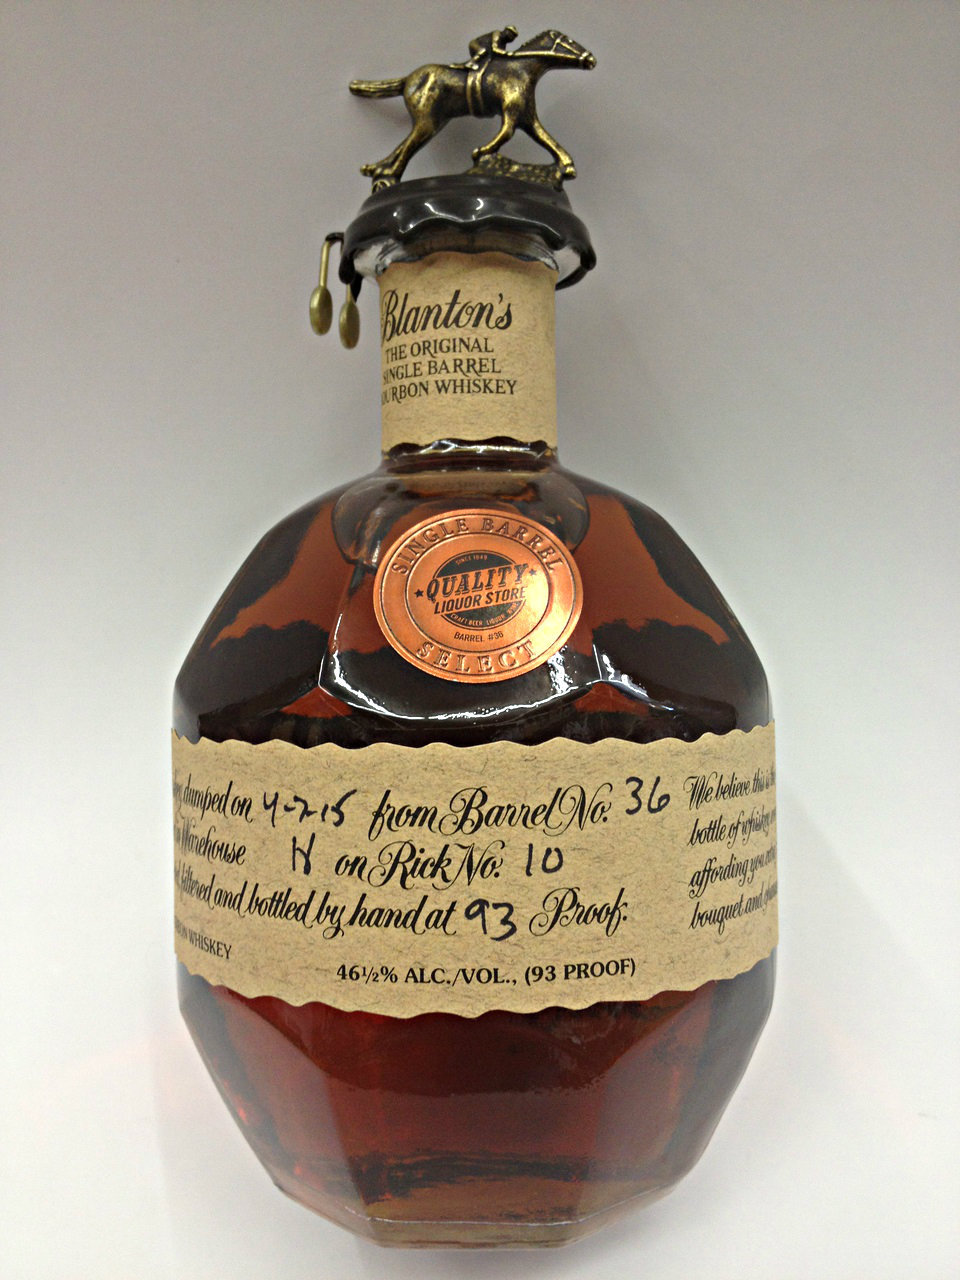 Blanton's Single Barrel Select Private Selection from Quality Liquor Store